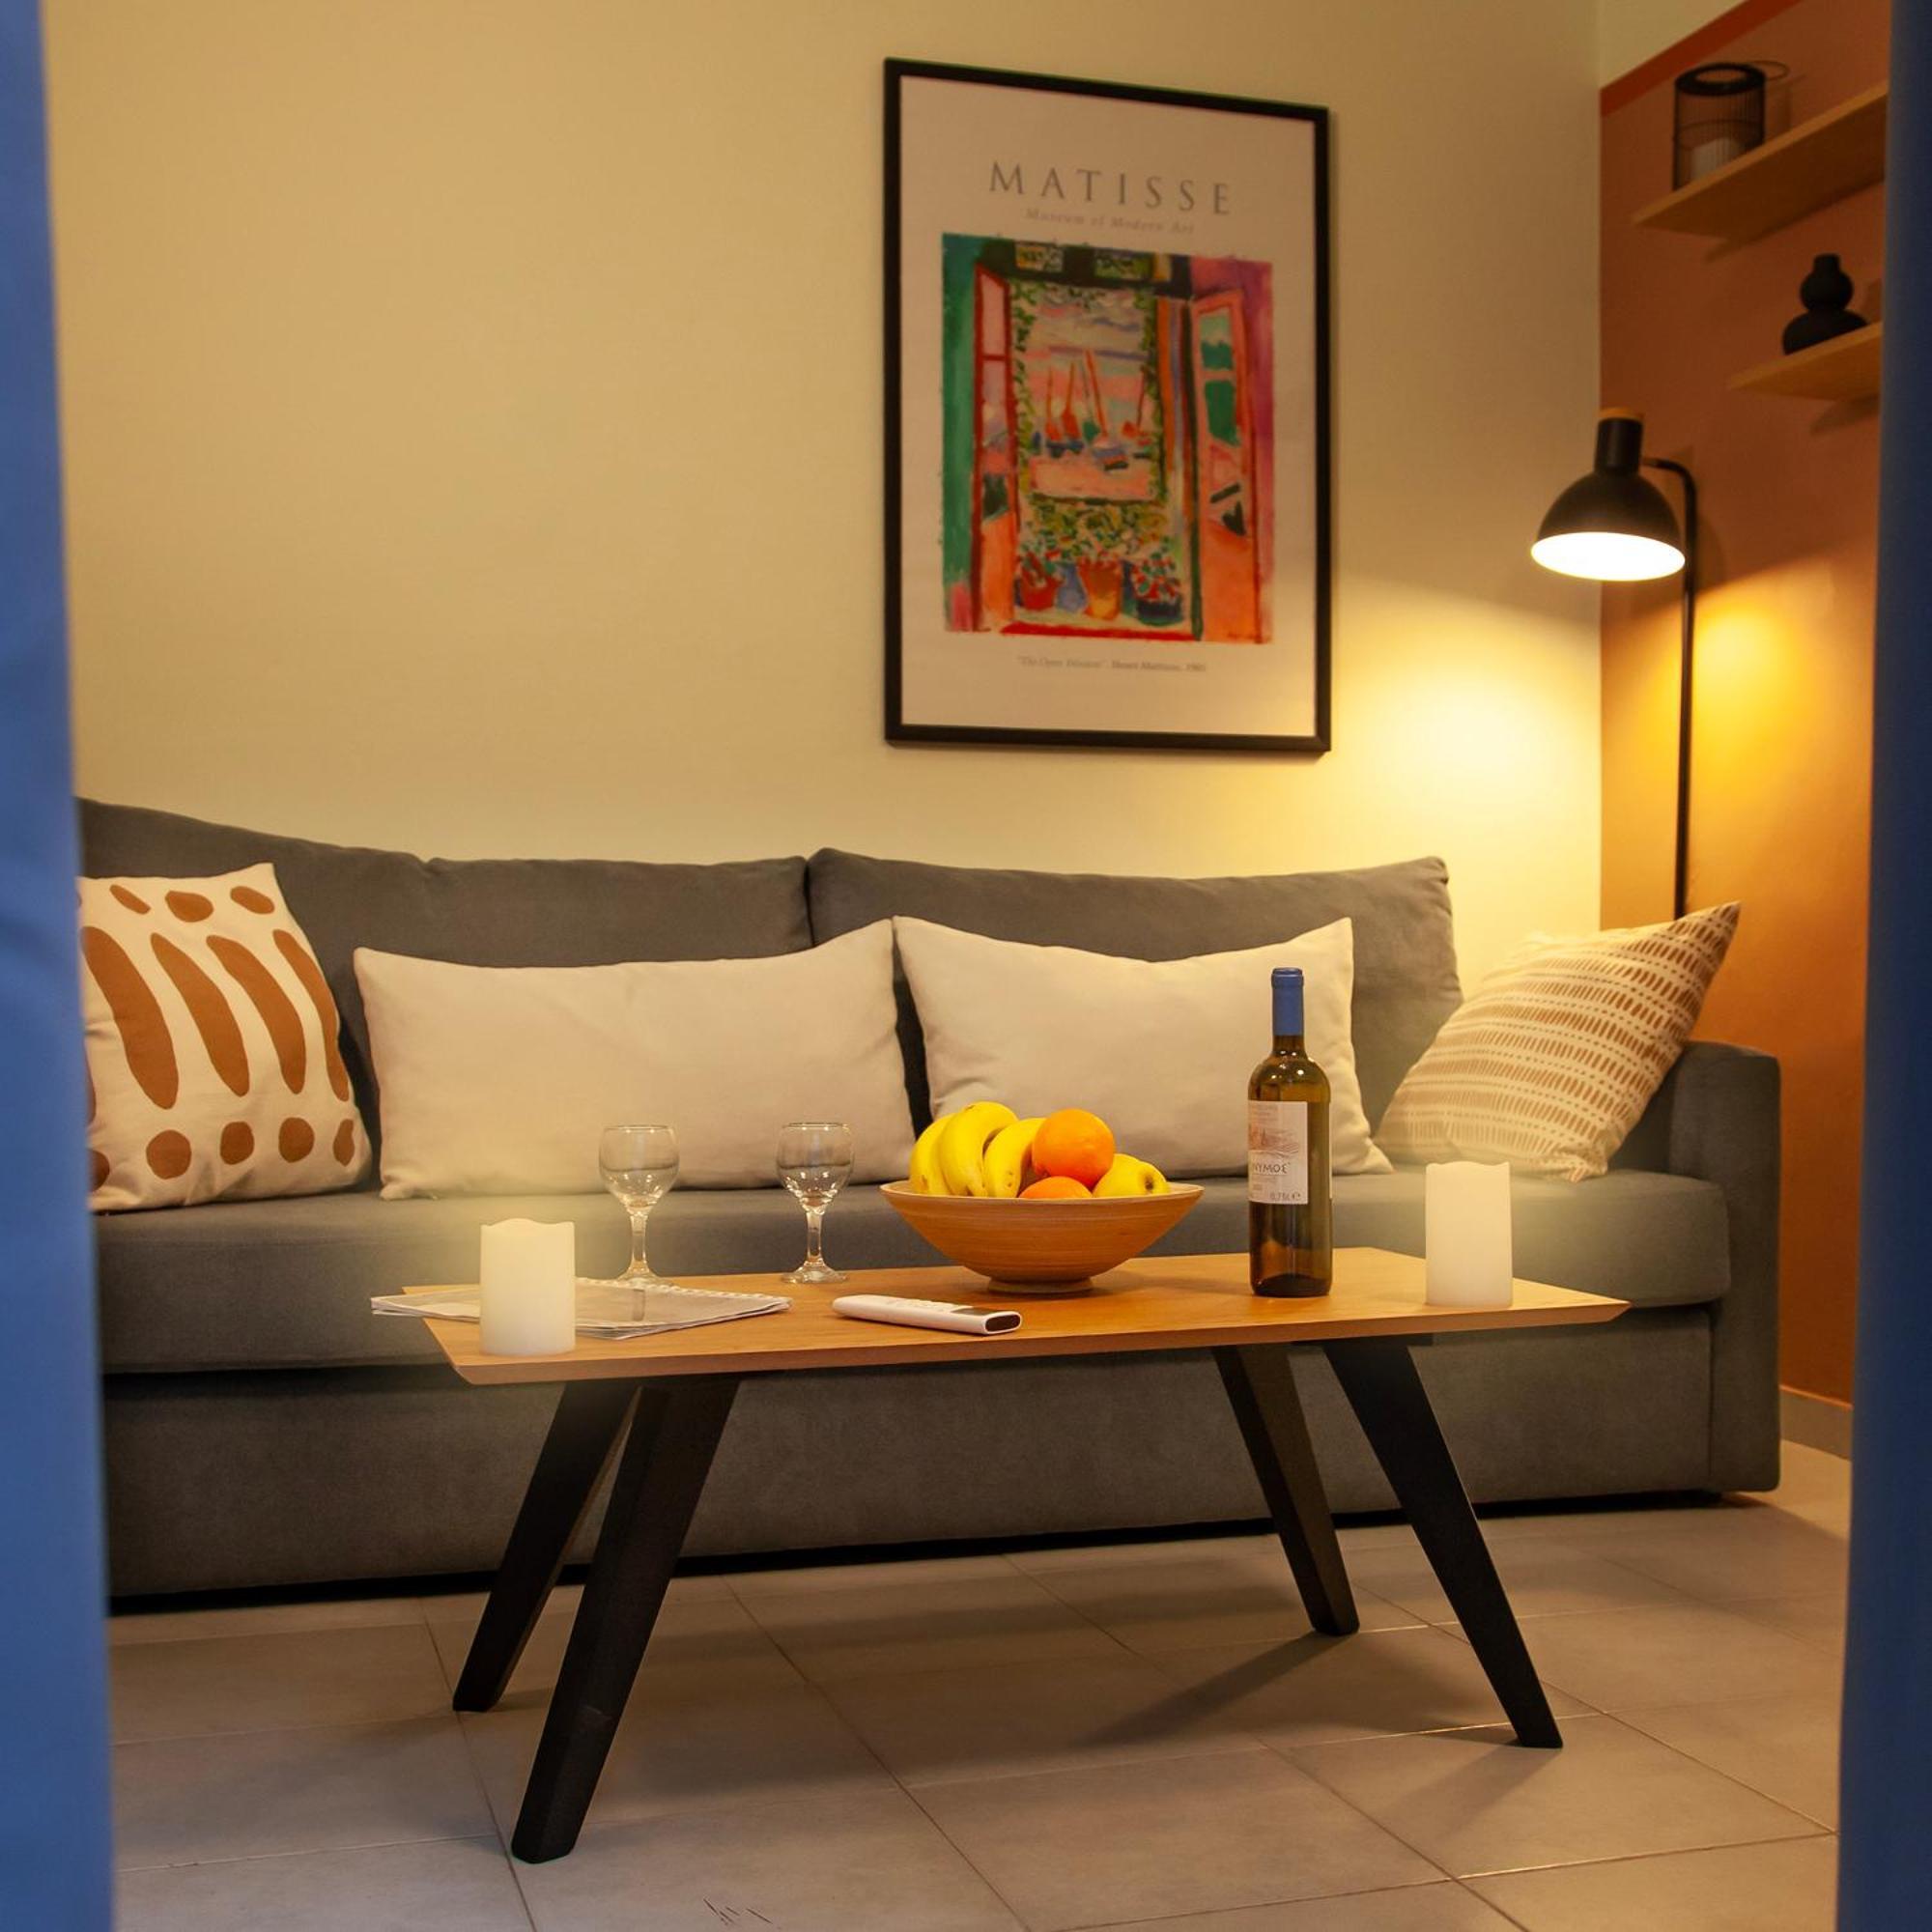 Aris123 By Smart Cozy Suites - Apartments In The Heart Of Athens - 5 Minutes From Metro - Available 24Hr Εξωτερικό φωτογραφία